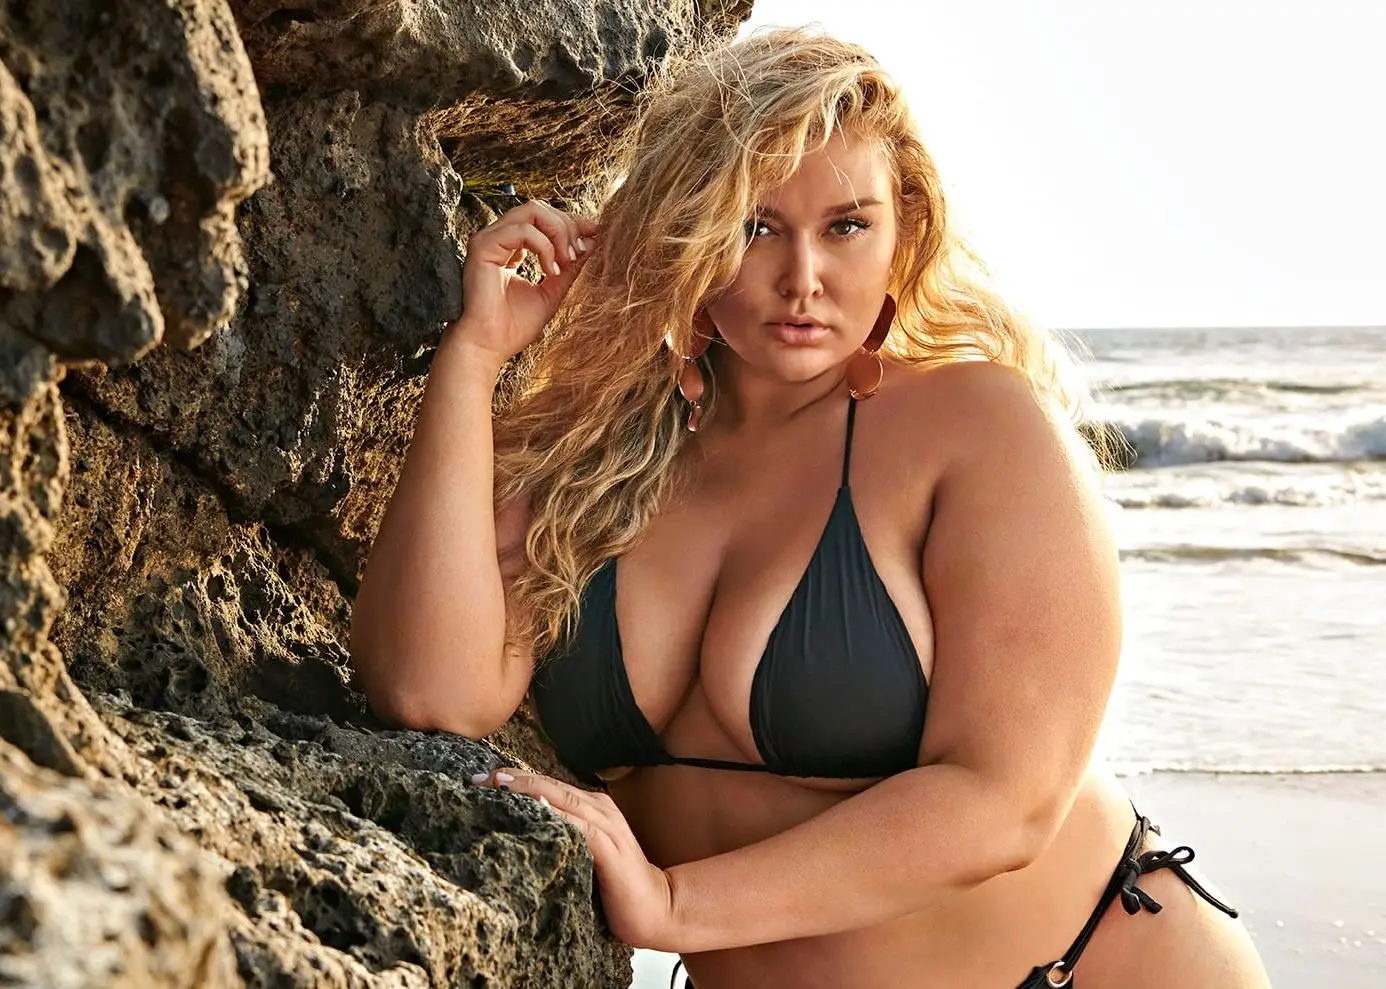 Hunter Mcgrady By Yu Tsai In Bali Indonesia For Sports Illustrated Swimsuit 2020 Avaxhome